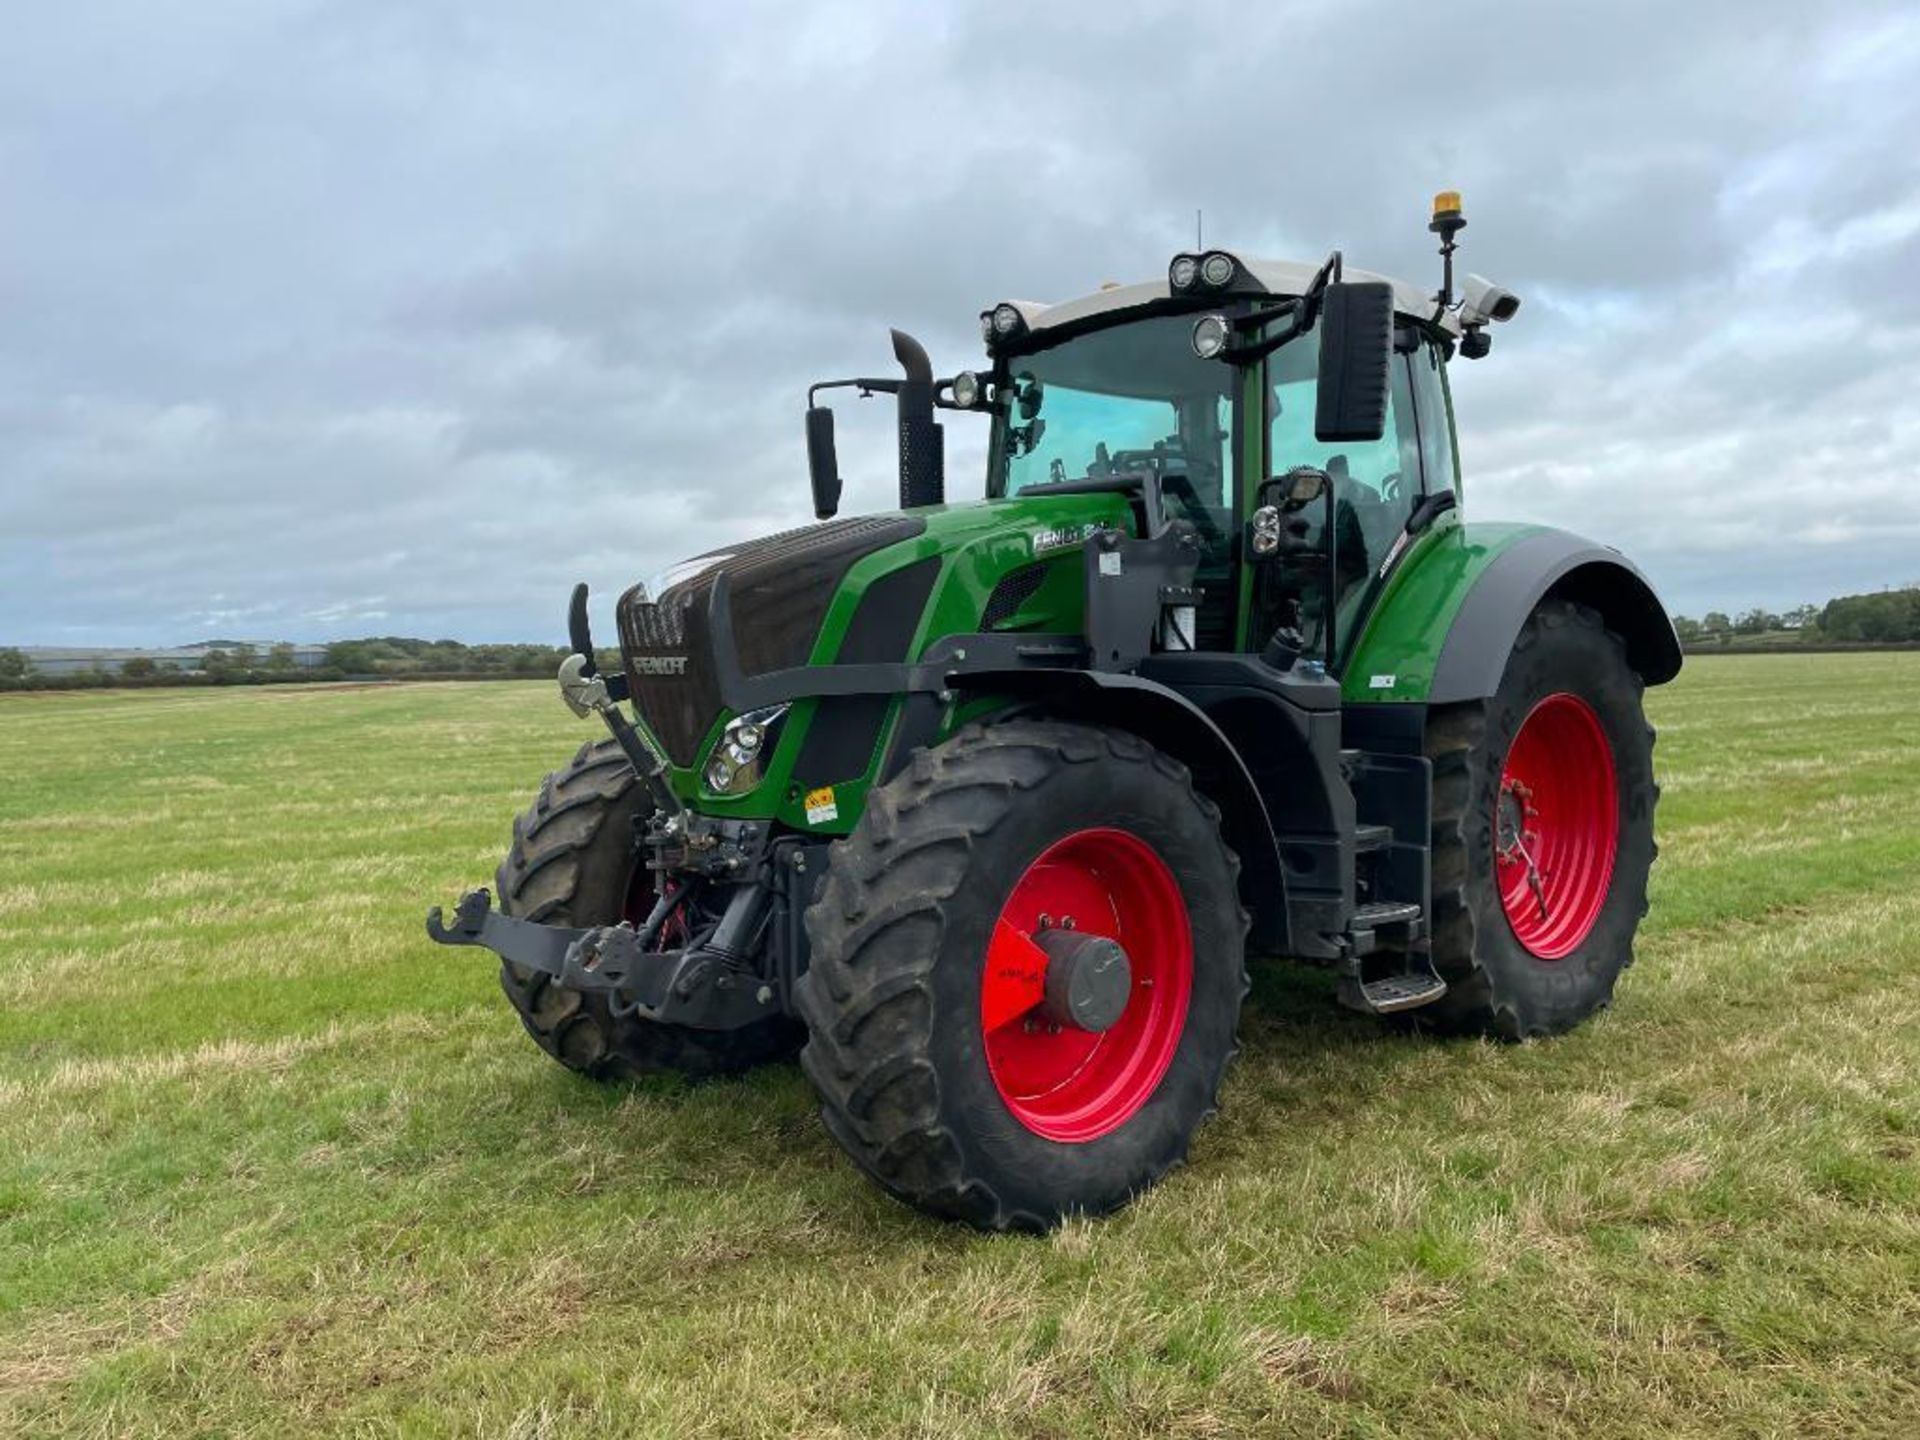 2018 Fendt 828 Vario Profi Plus 65kph 4wd tractor with Quicke Q8M front loader and pallet tines, fro - Image 3 of 29